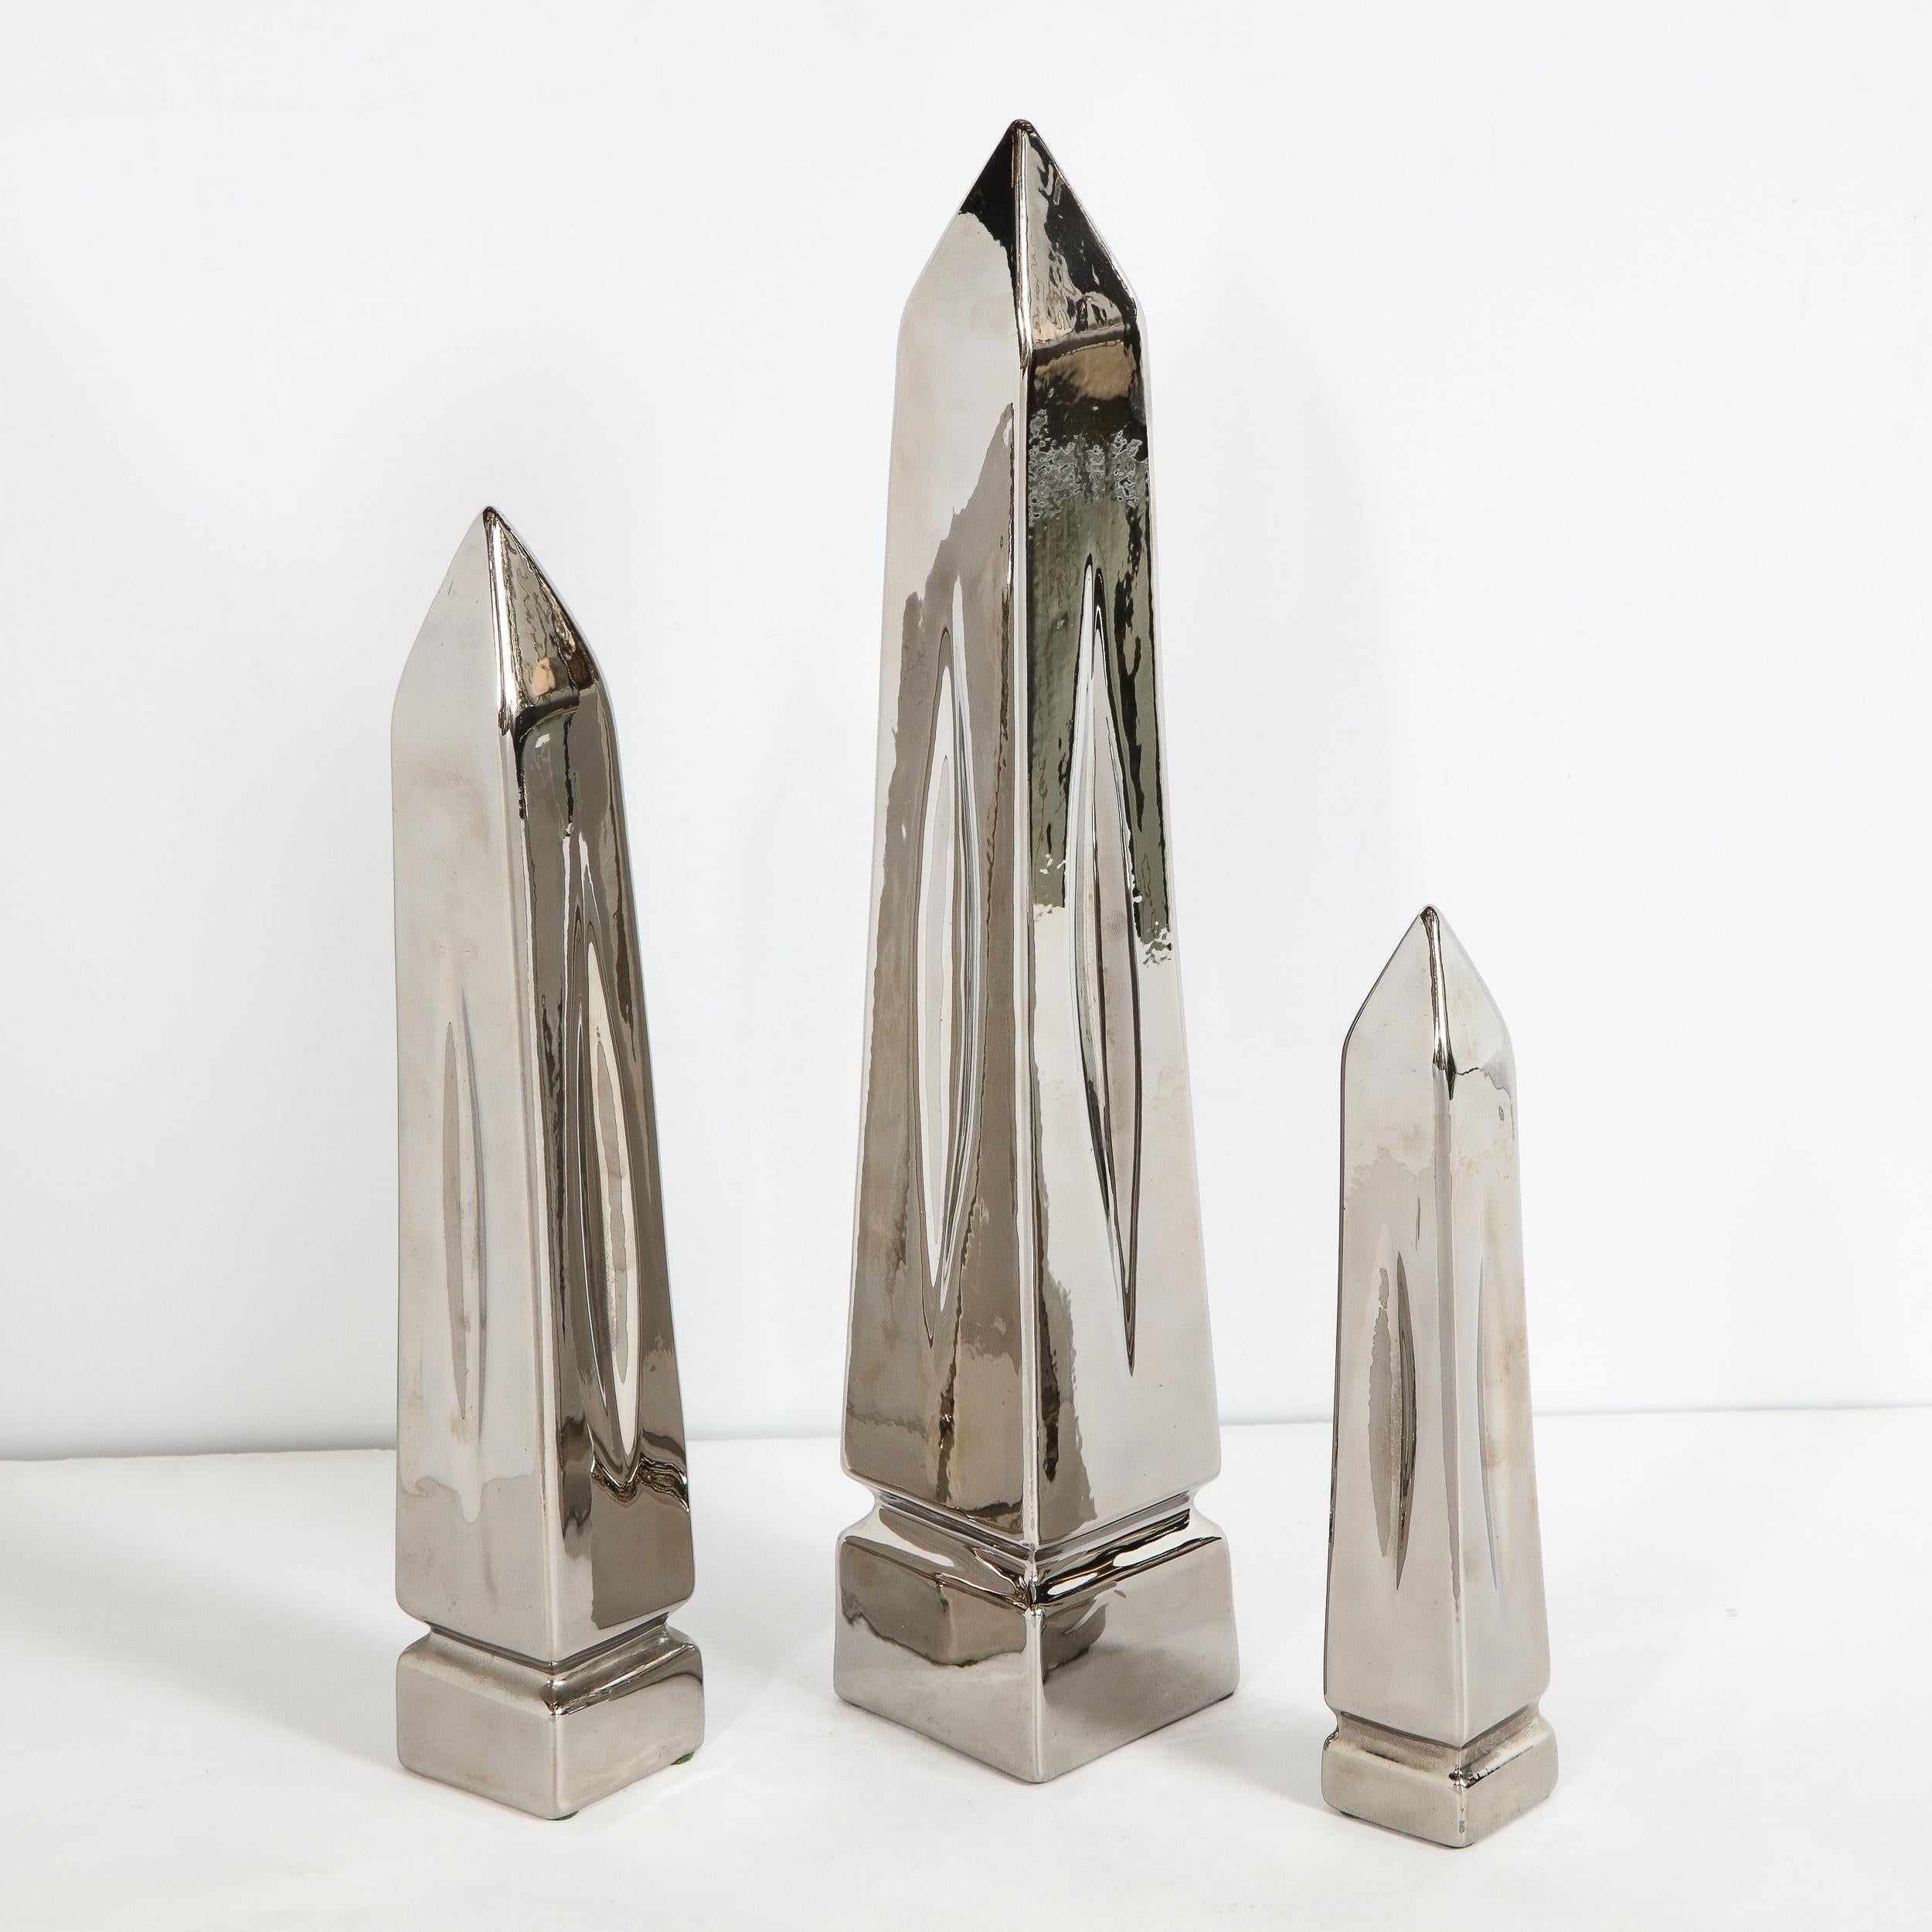 Set of Three Mid-Century Modern Platinum Plated Obelisk Sculptures Signed Jaru In Excellent Condition For Sale In New York, NY